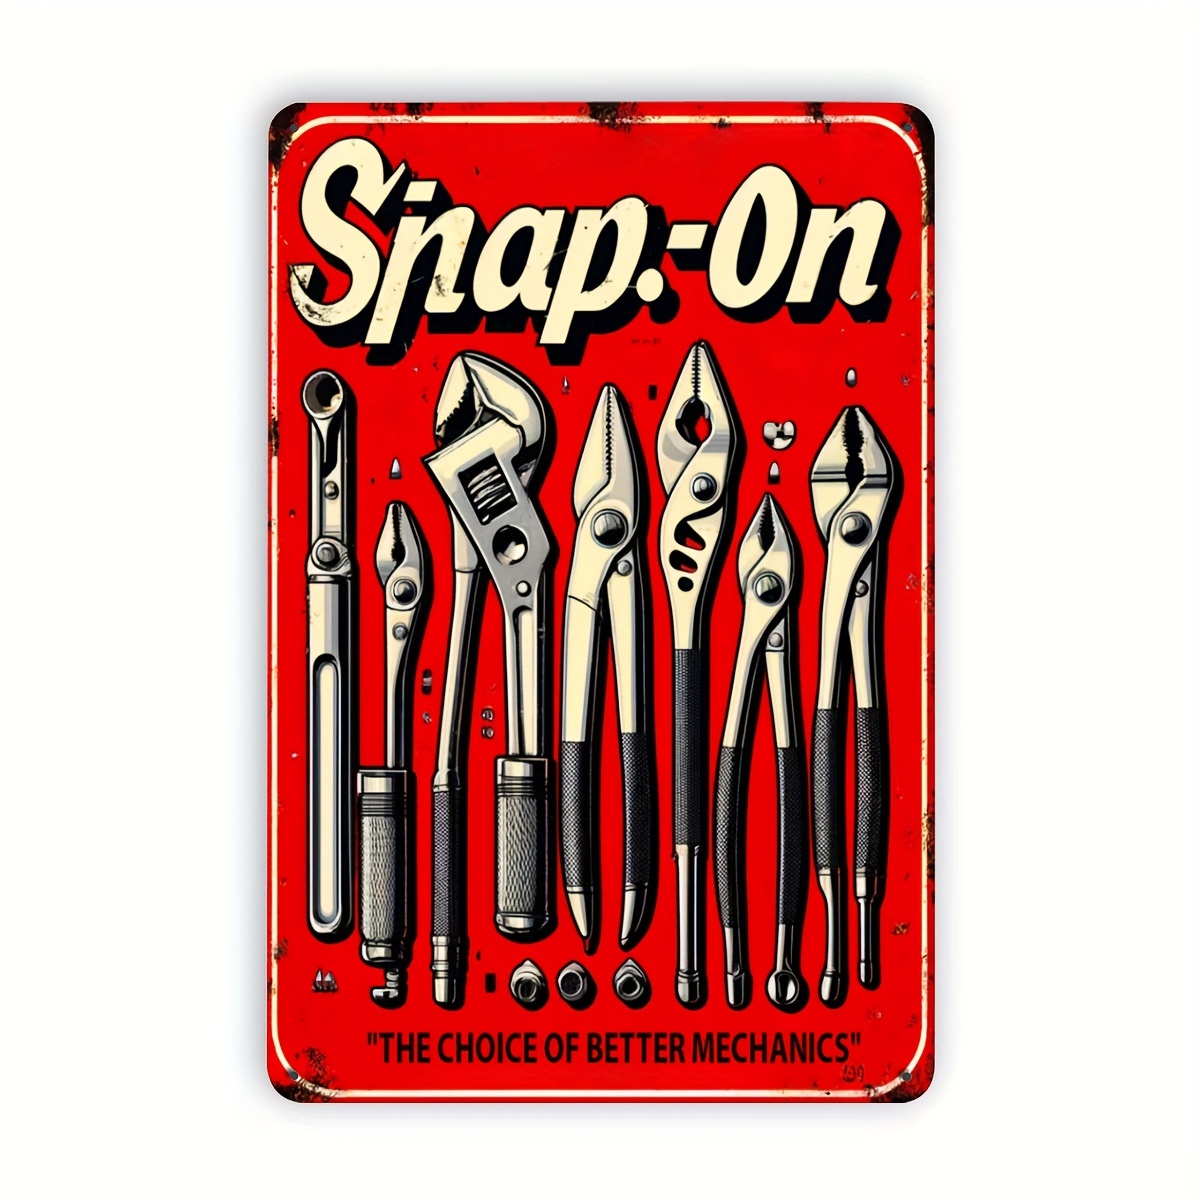 

Vintage Garage Metal Sign: Snap-on - The Choice Of Better Mechanics - 8x12 Inches - Material - Perfect Gift For Car Enthusiasts And Mechanics